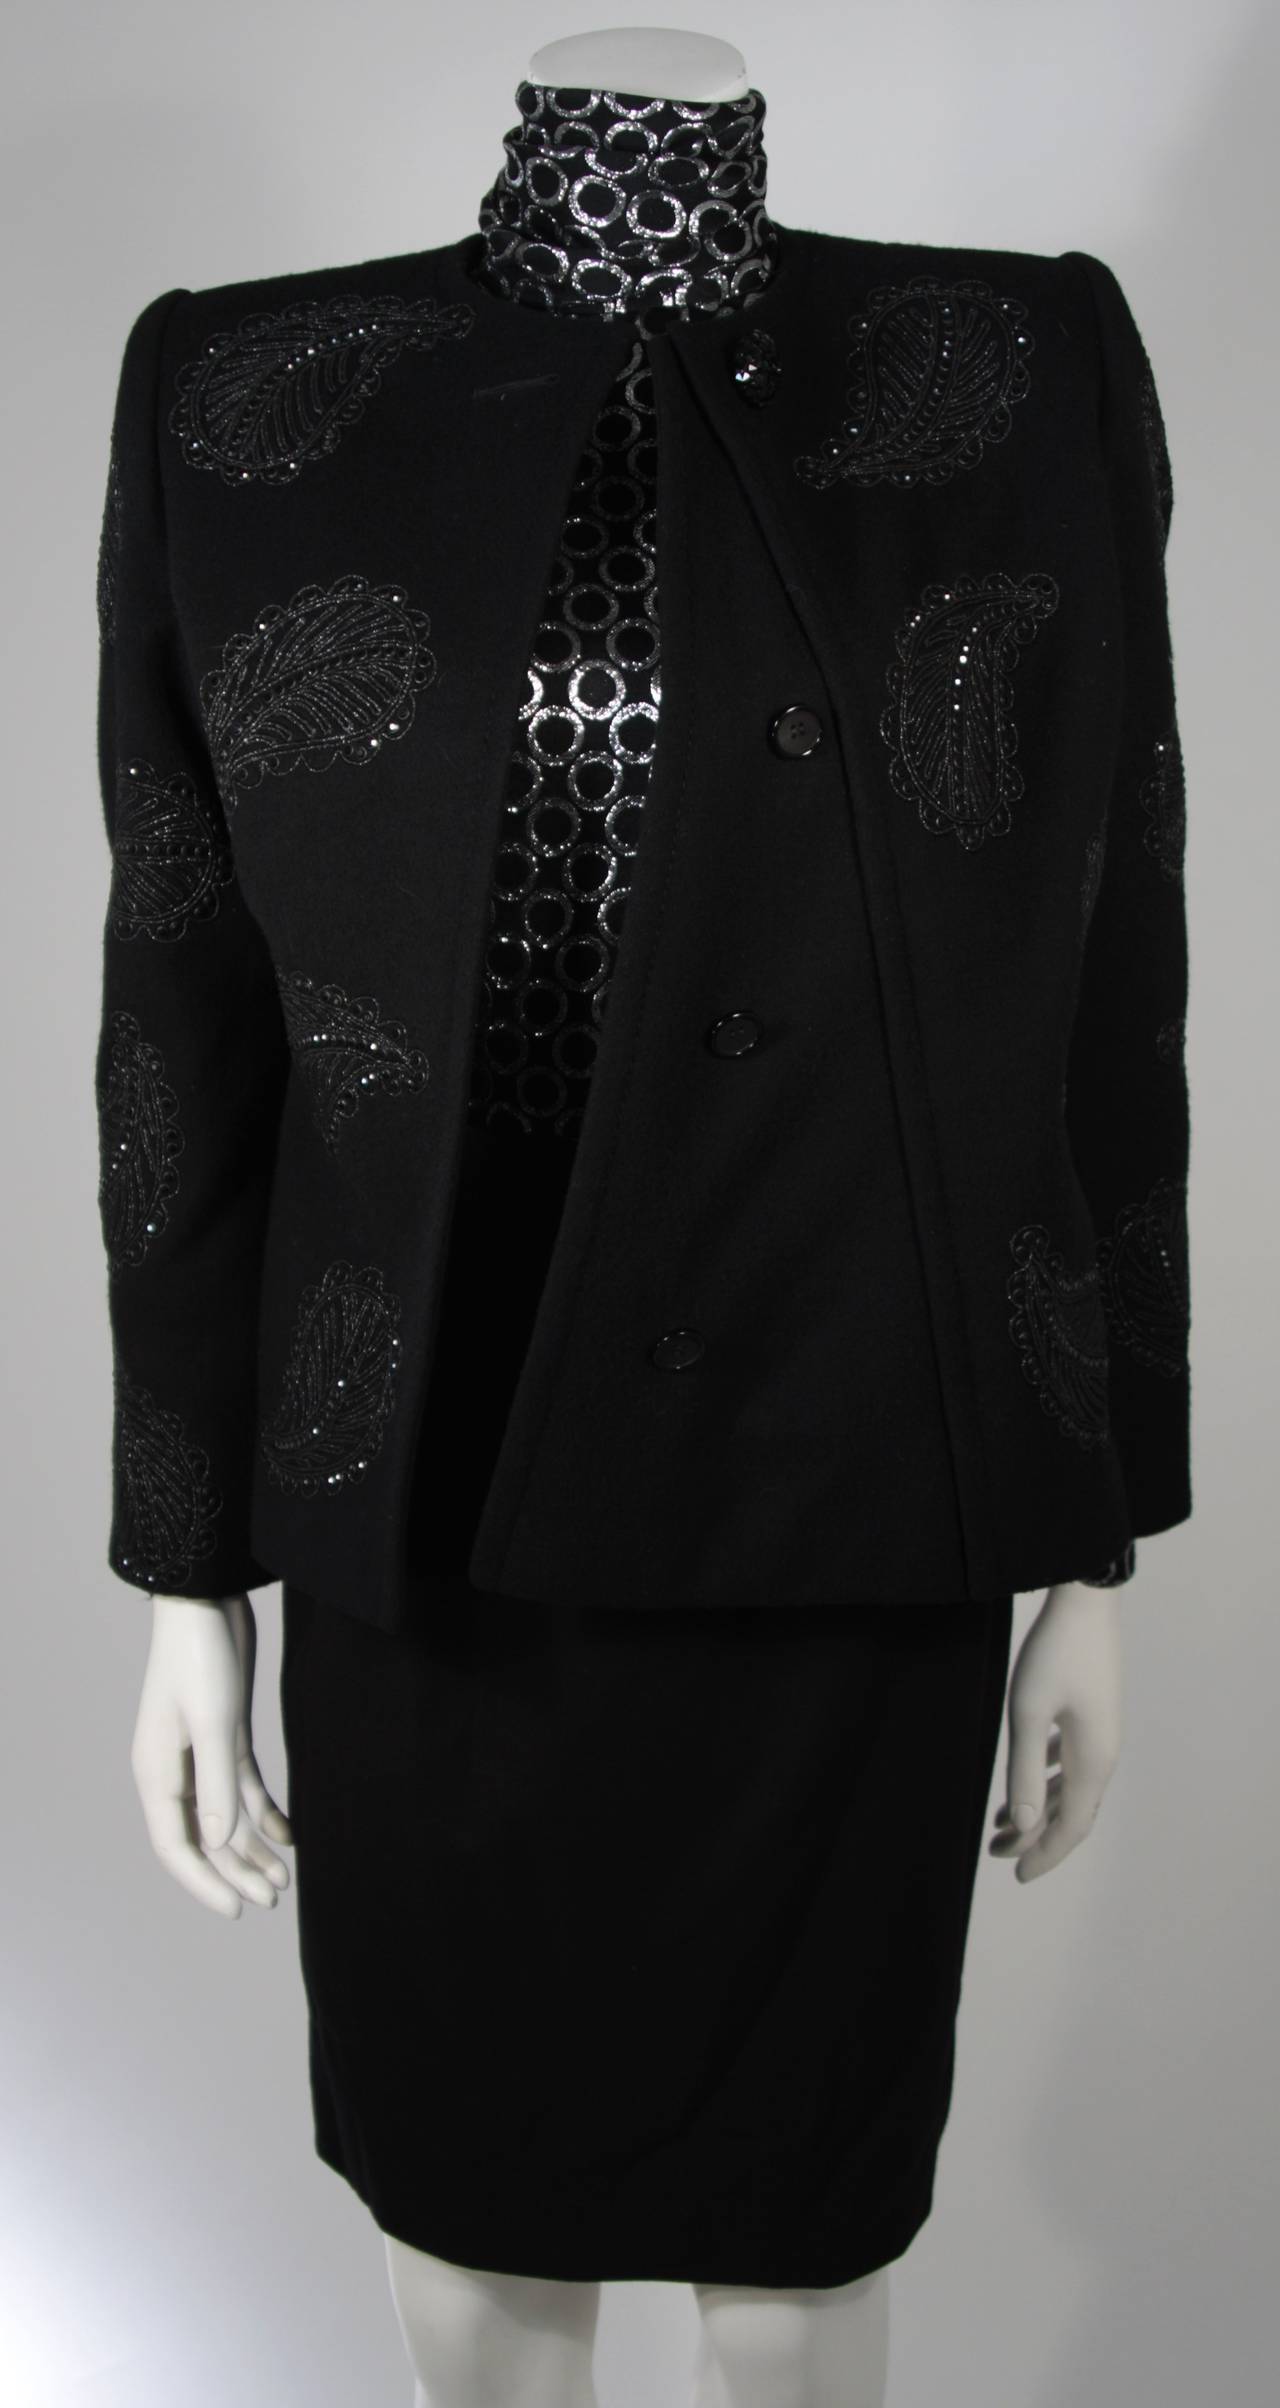 This Galanos ensemble is available for viewing at our Beverly Hills Boutique. The ensemble features three pieces. The jacket and skirt are composed of a black wool. The jacket has a metallic thread embroidered paisley design with black rhinestone